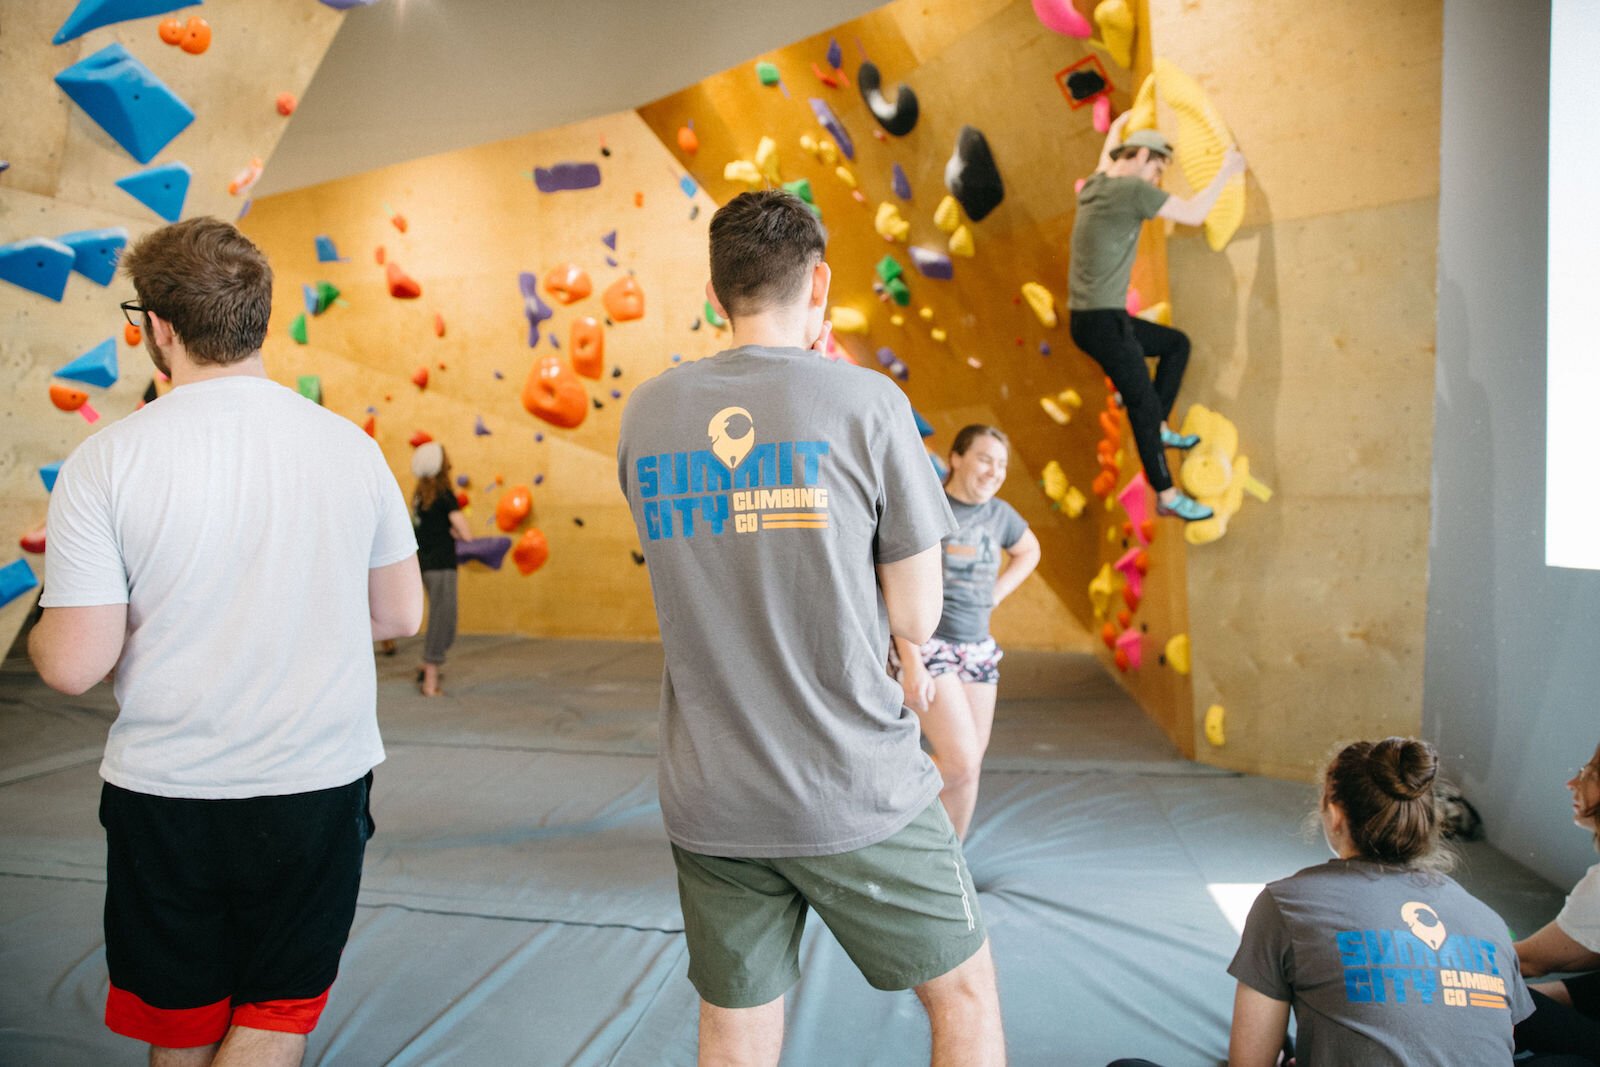 Members wait for their turn to try out the new routes at Summit City Climbing Co.